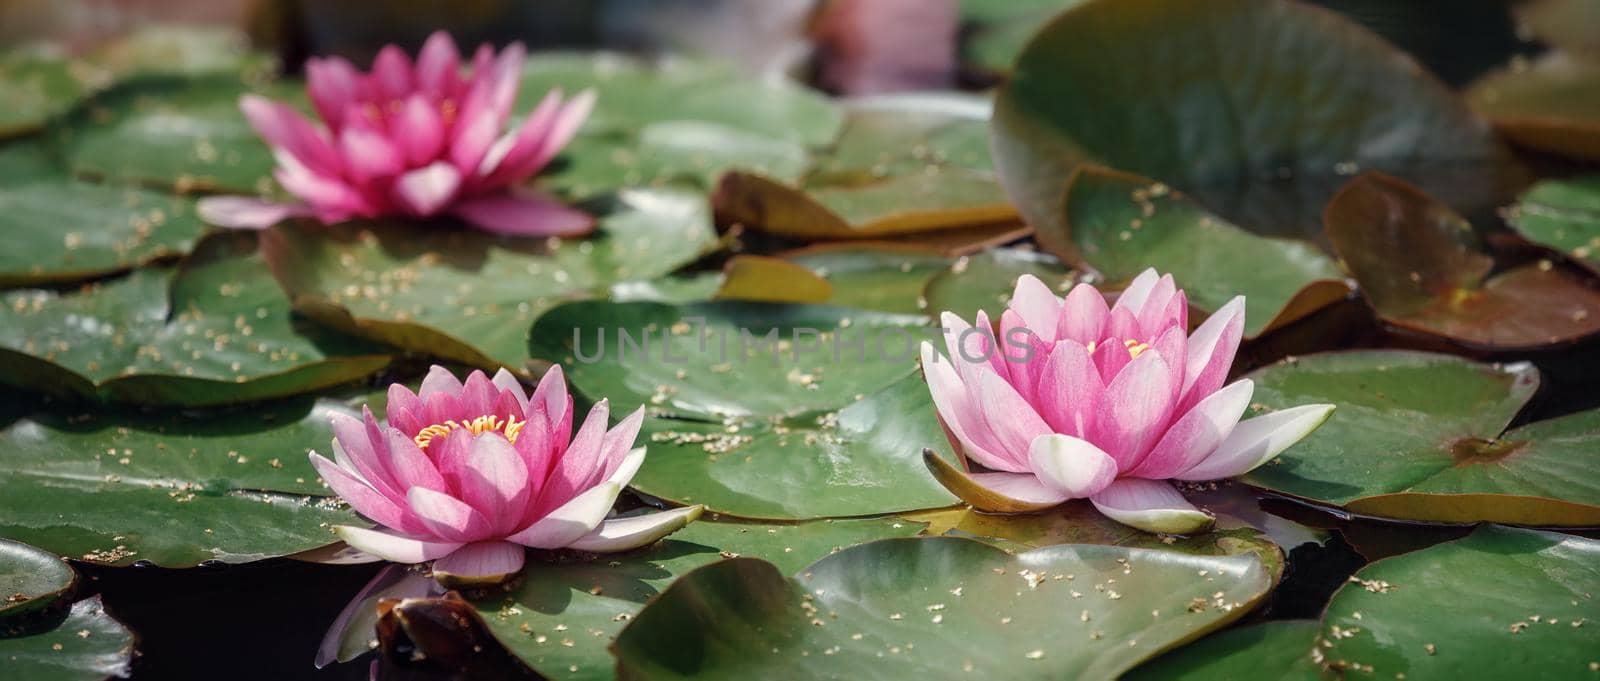 Beautiful blooming red water lily lotus flower with green leaves in the pond. by Lincikas